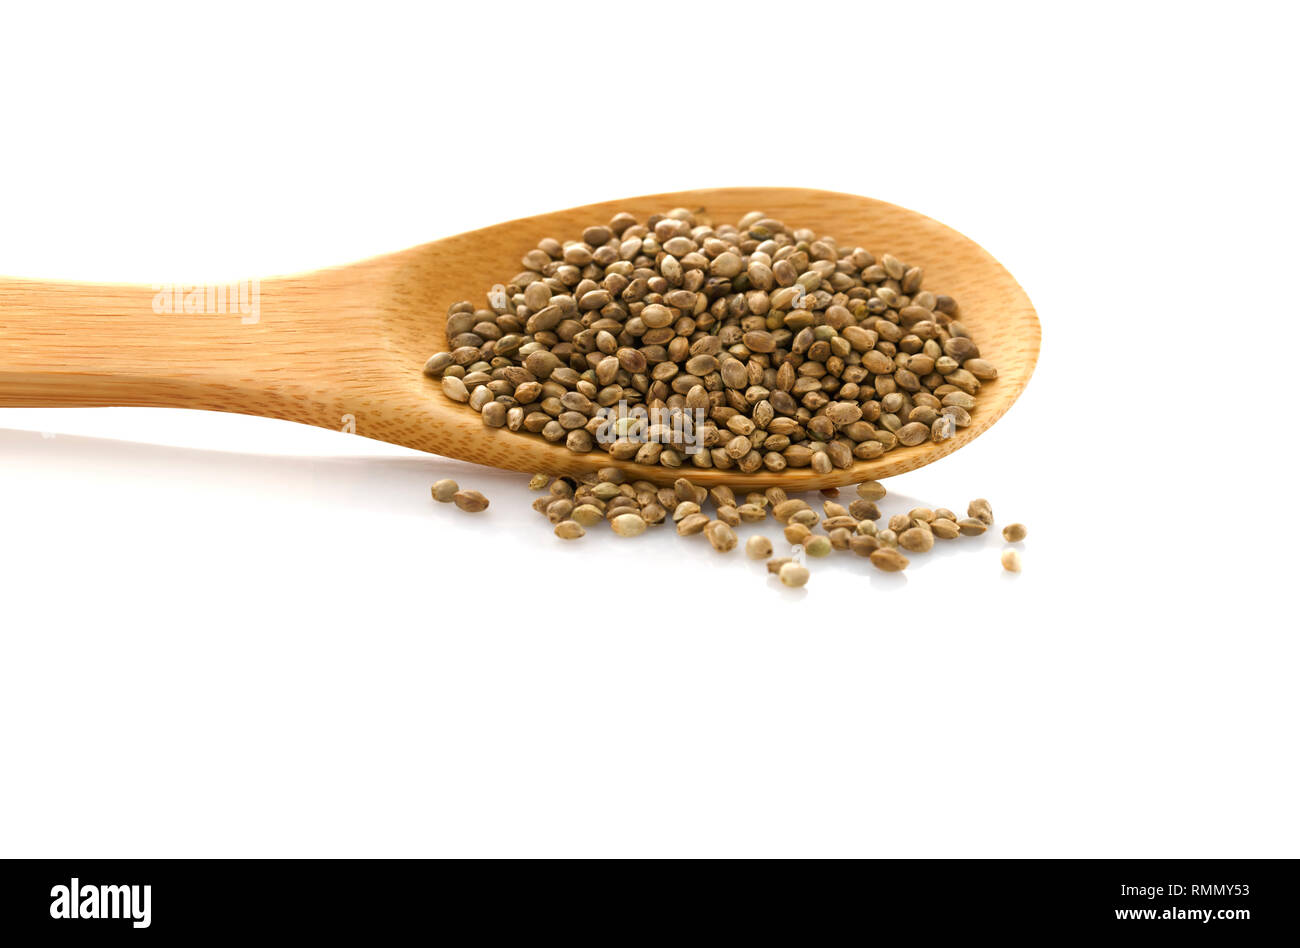 Hemp seed. Wooden spoon with hemp. Food additive. Isolated on white background. Cannabis. Stock Photo